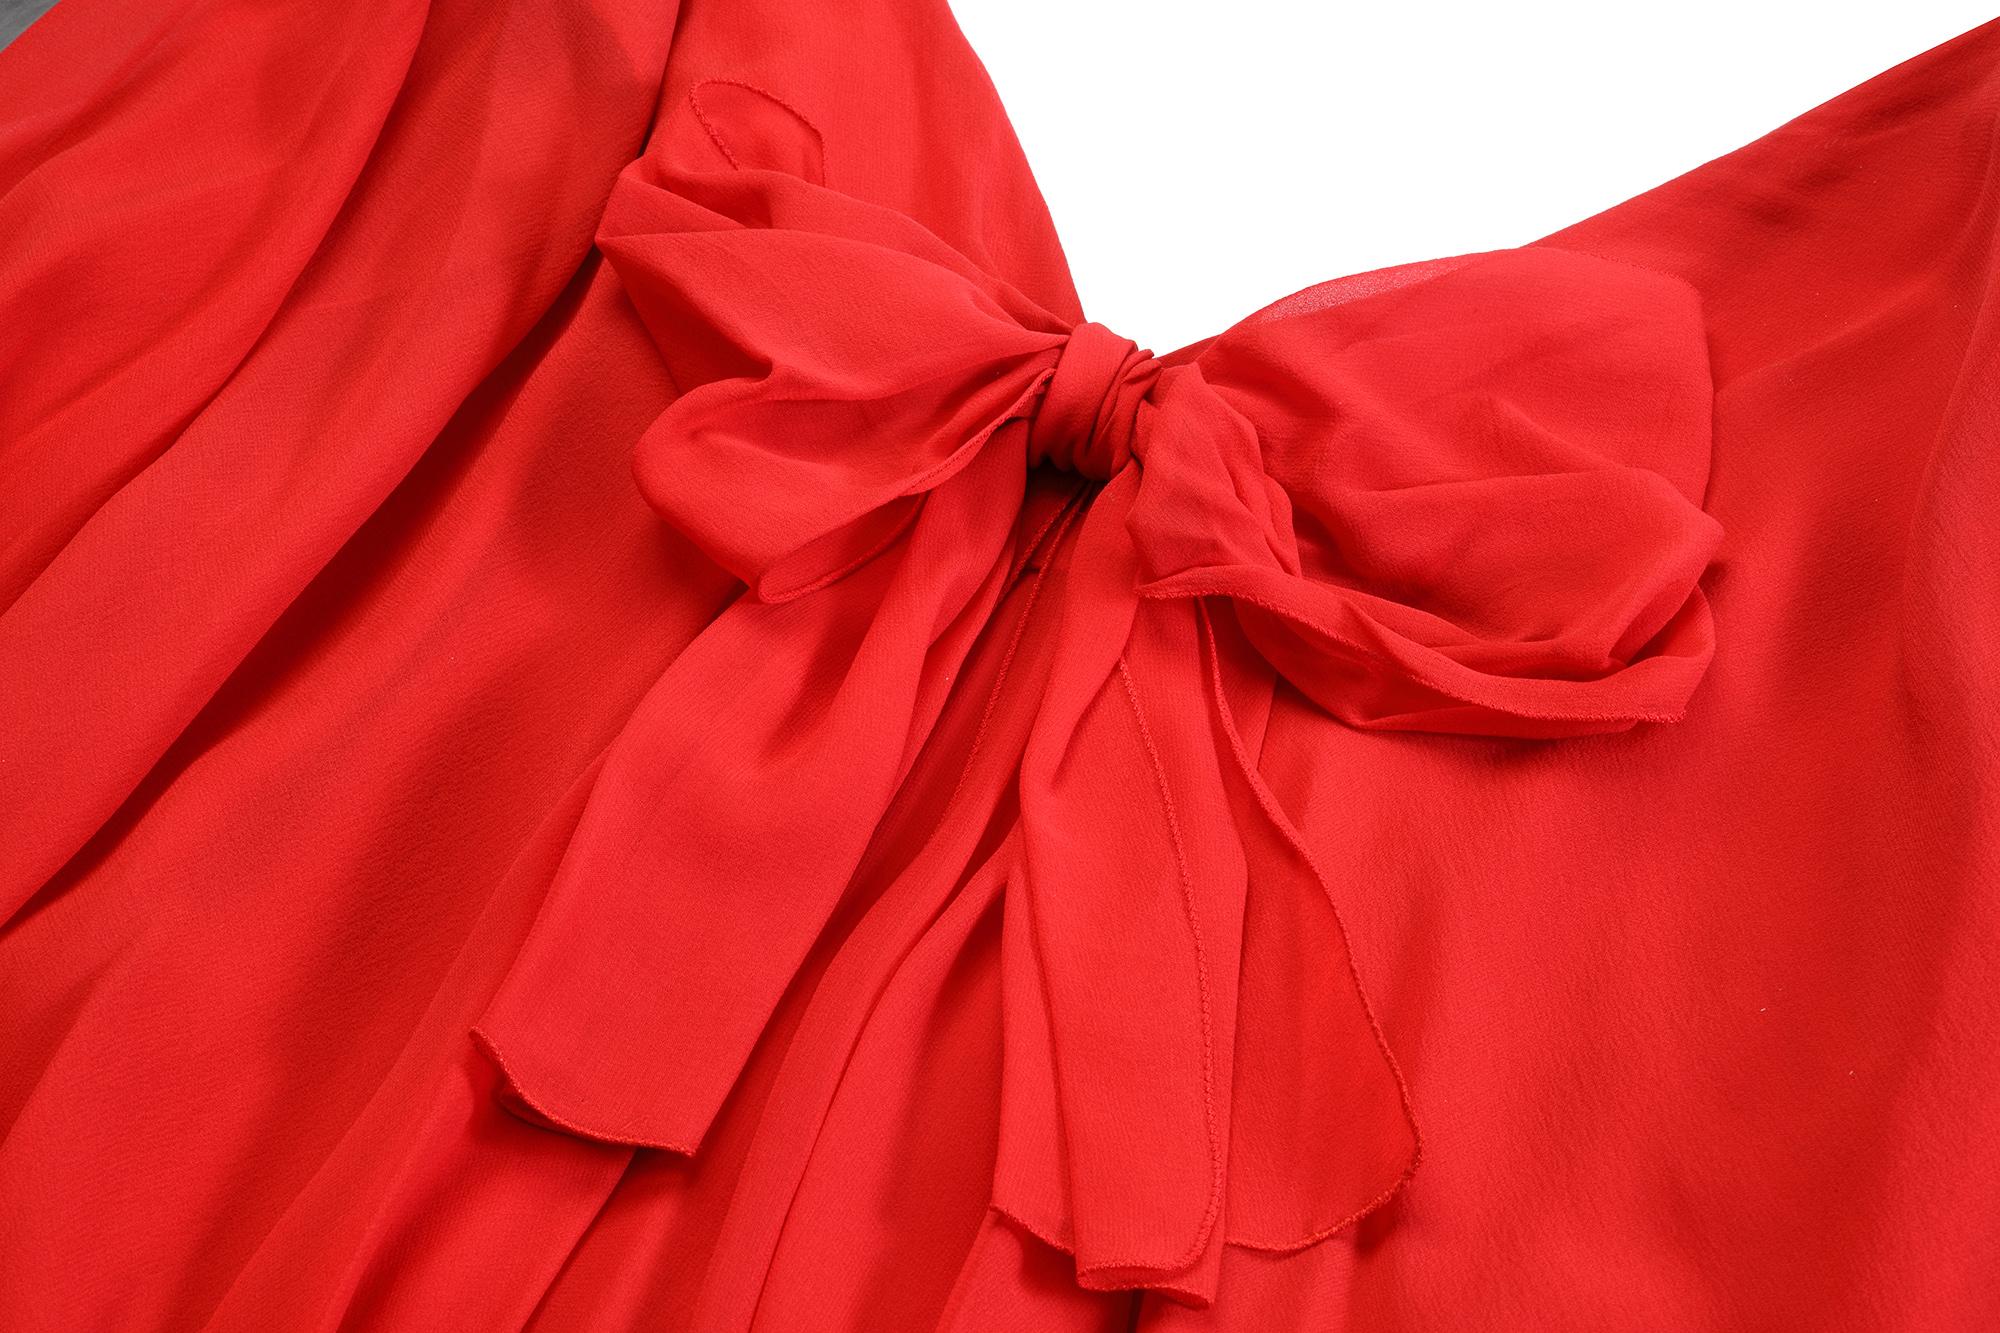 1970s Christian Dior Demi Couture Red Silk Chiffon Gown For Sale at ...